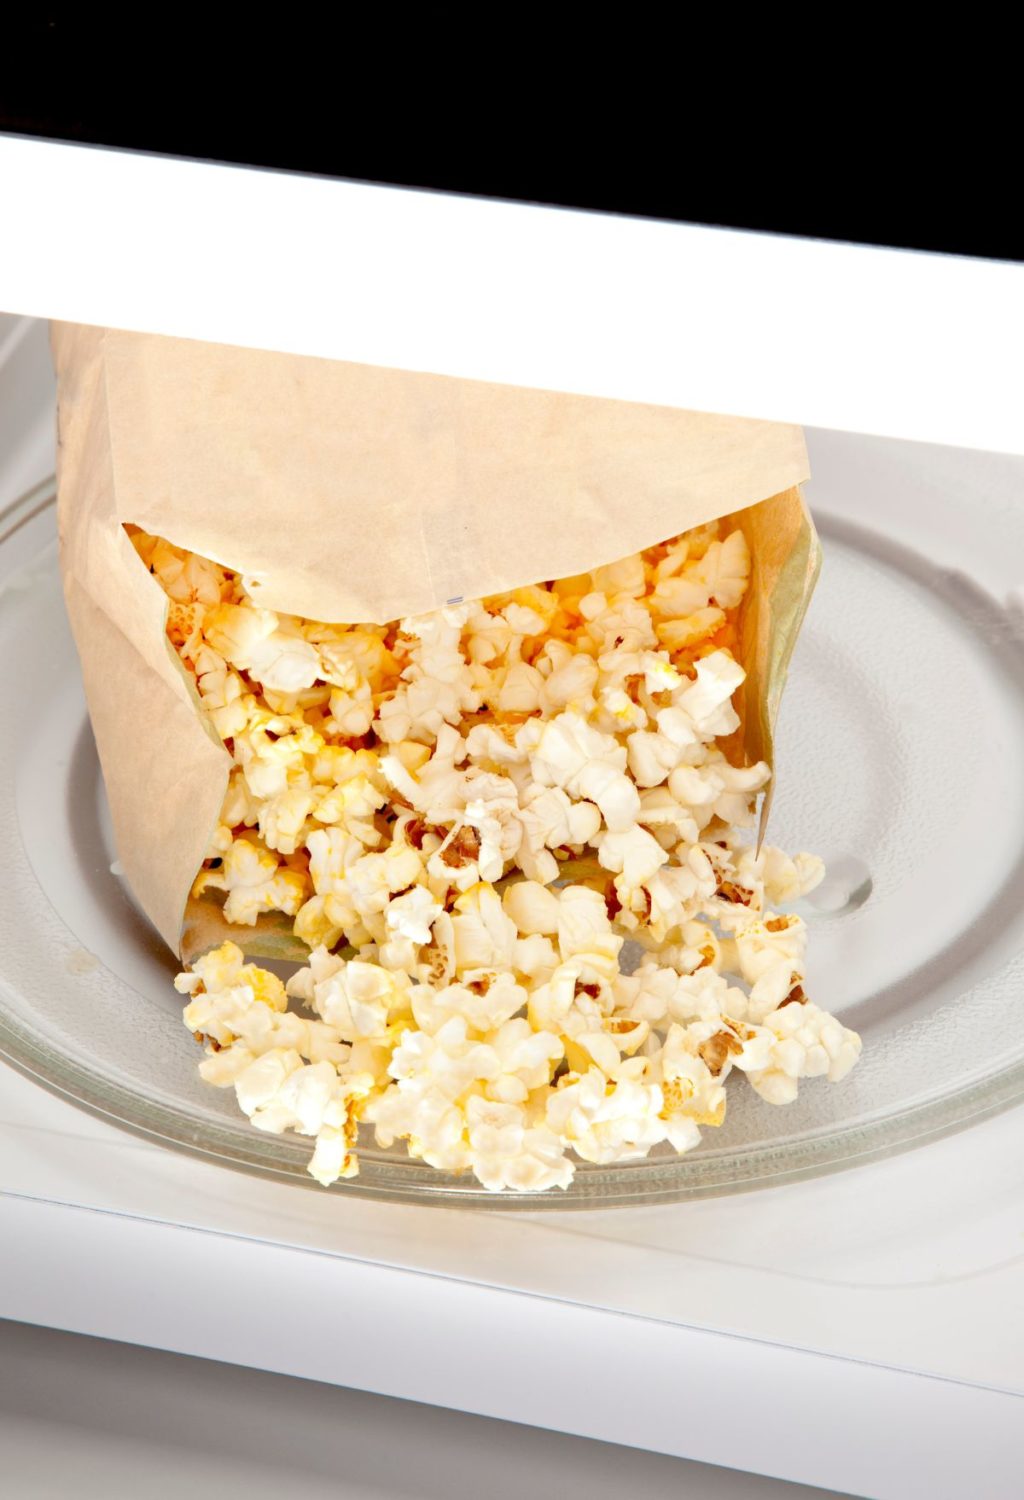 A bag of popcorn in a microwave.